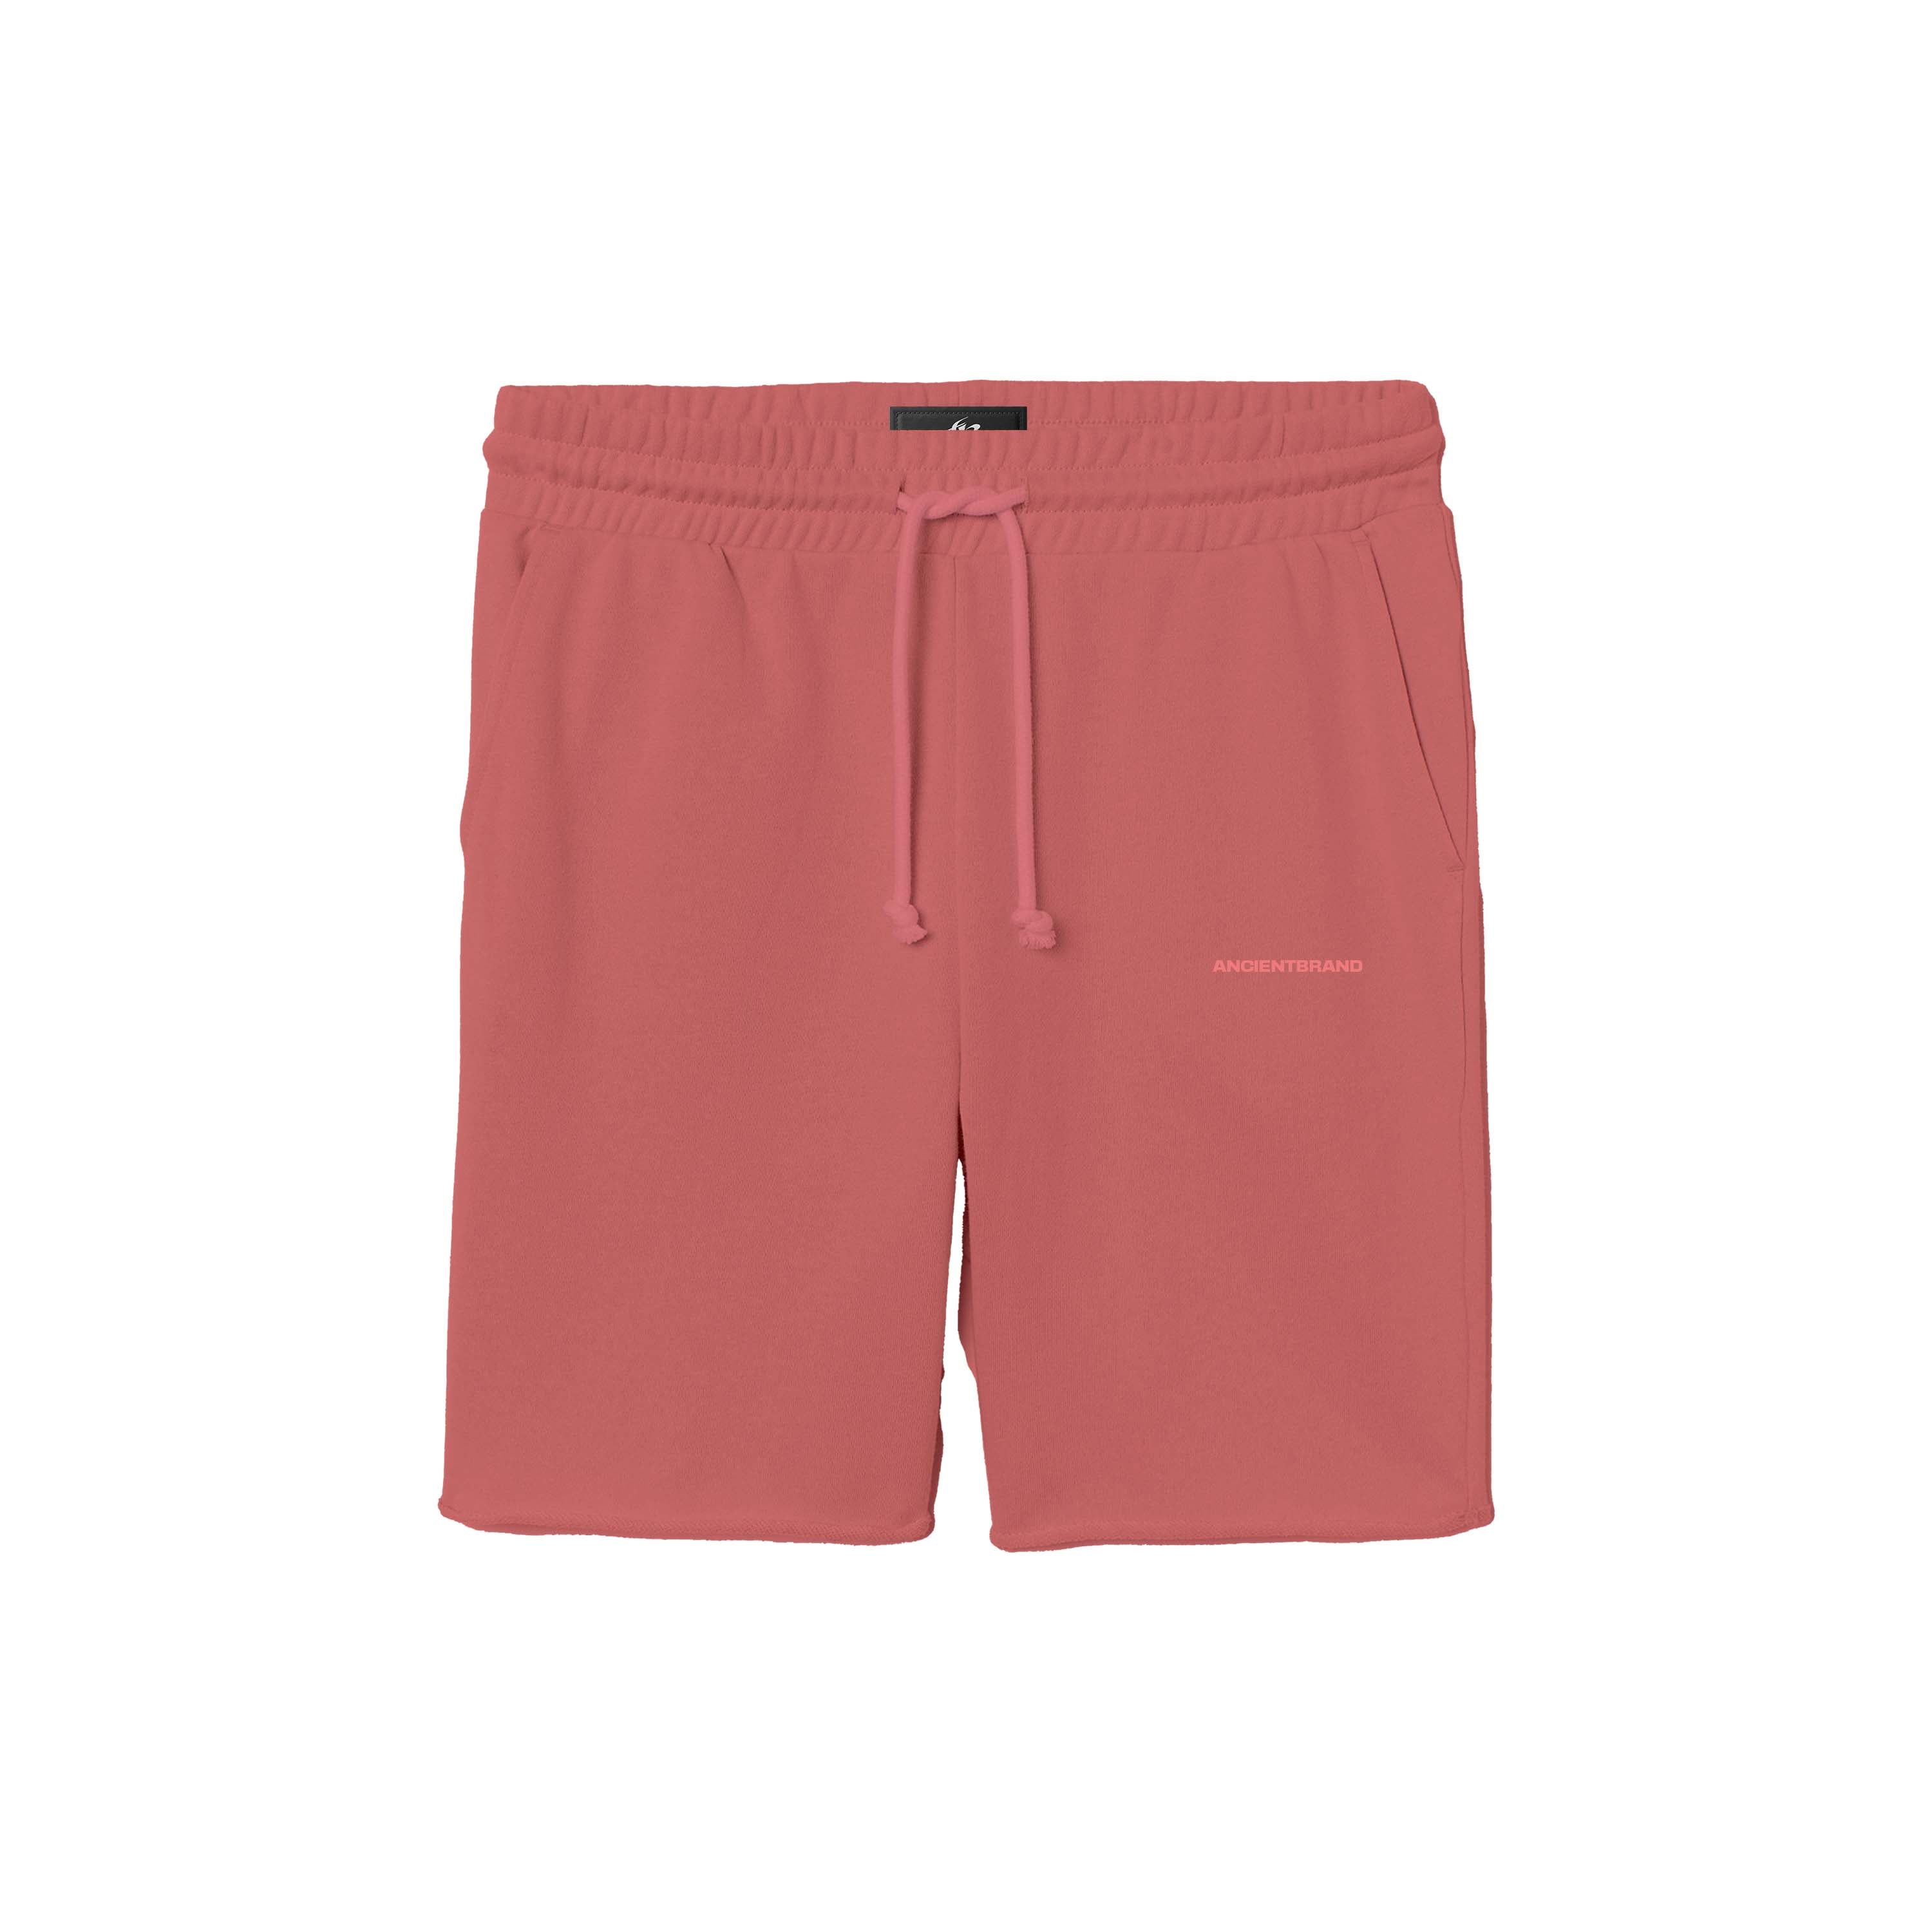 AncientBrand OG French Terry Shorts